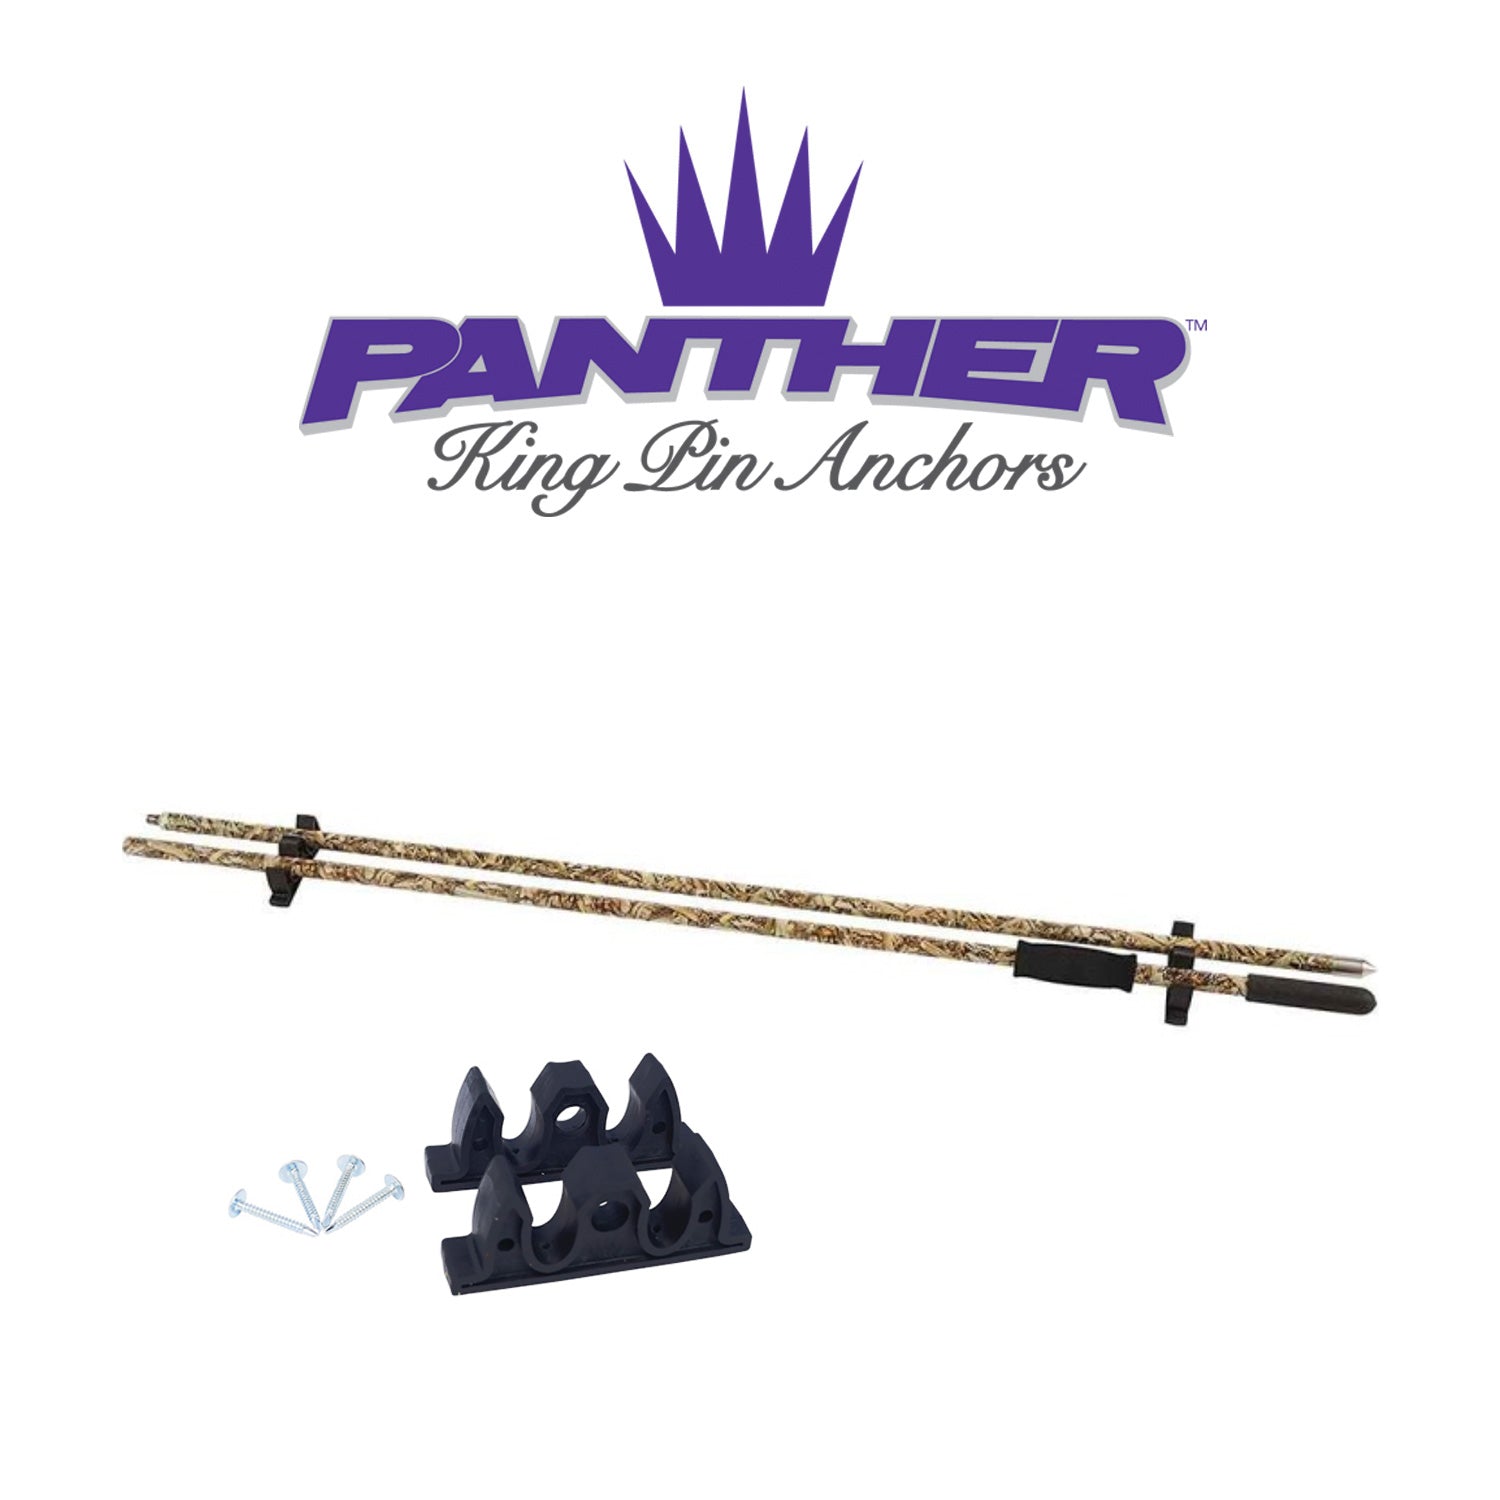 Panther King Pin 8ft Anchor Pole, Camo - 2 pc